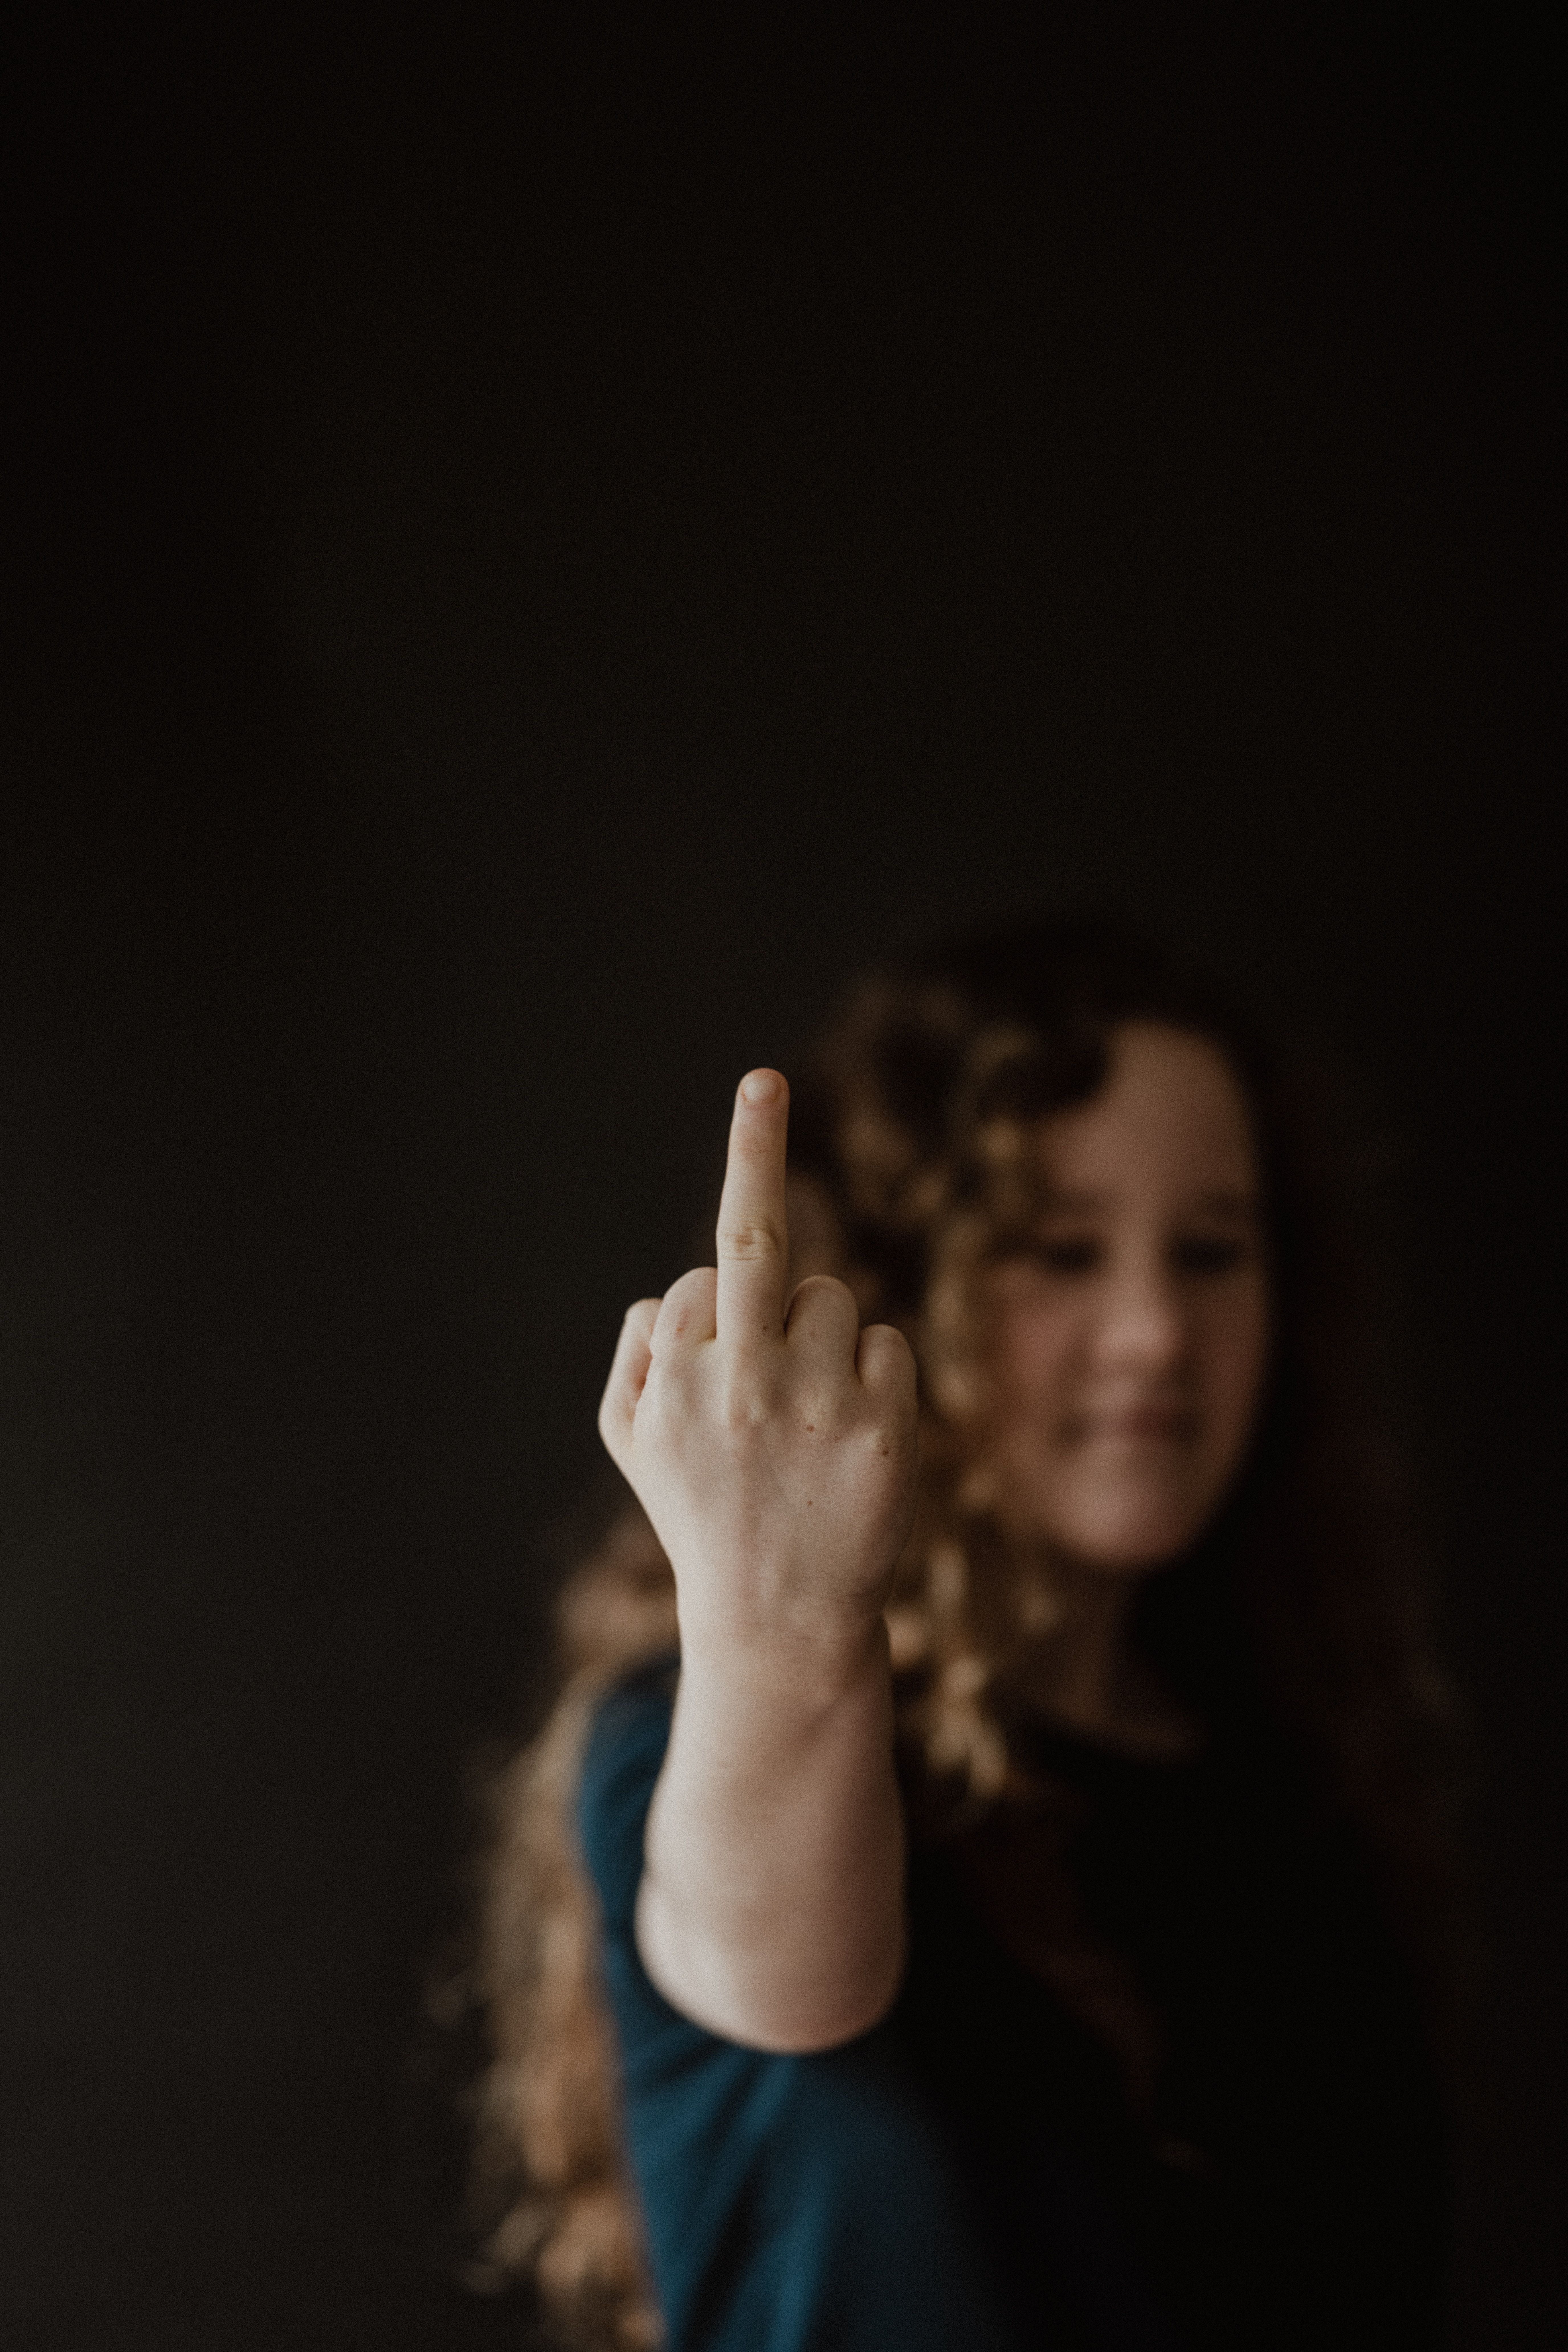 Middle Finger Picture. Download Free Image